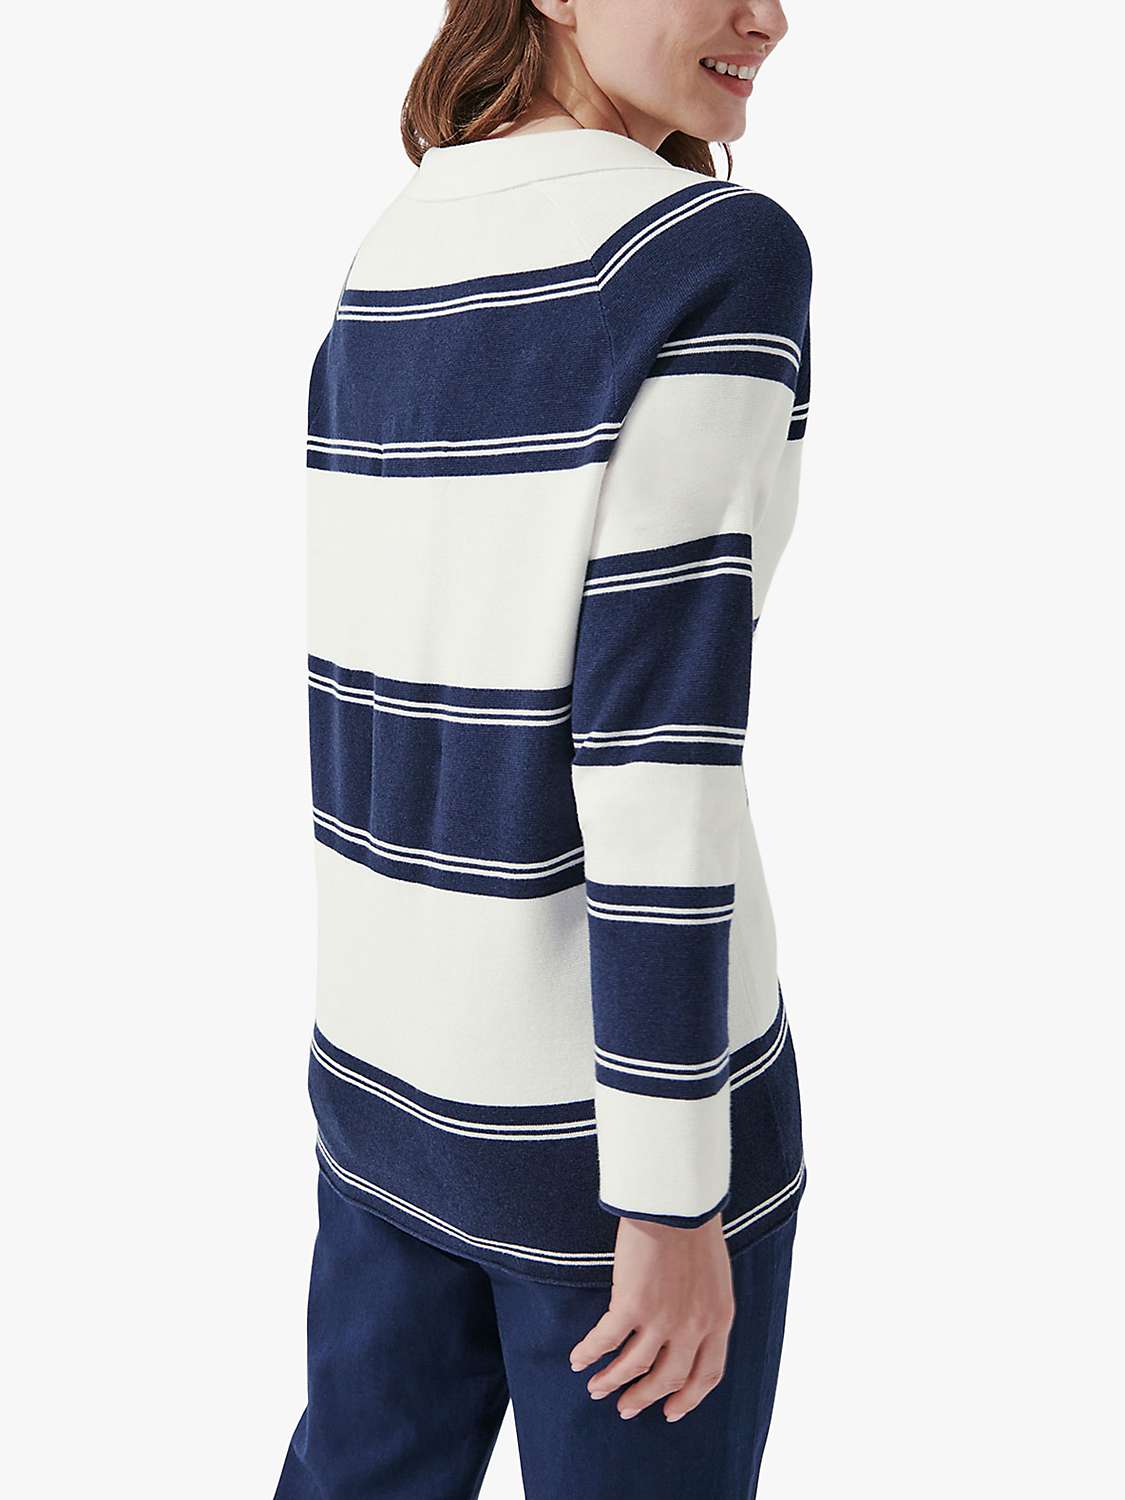 Buy Crew Clothing Dartmouth Stripe Collared Jumper, White/Navy Online at johnlewis.com